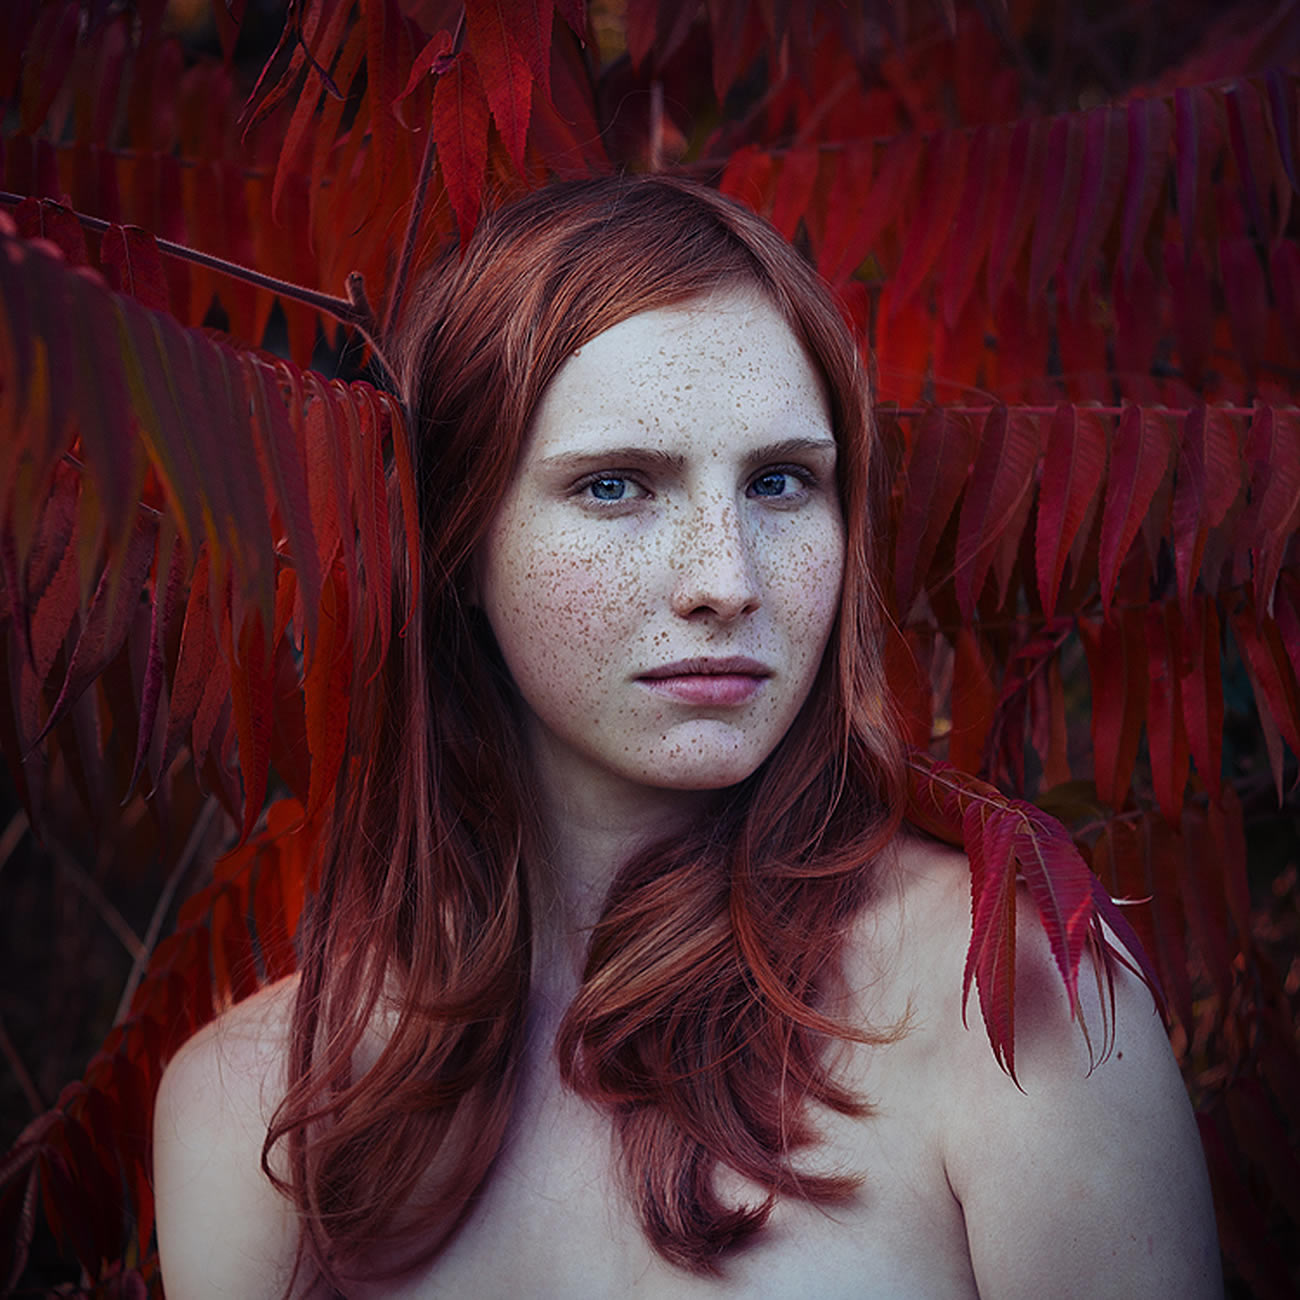 red hair girl with freckles with red feathers, photography by Michael Magin